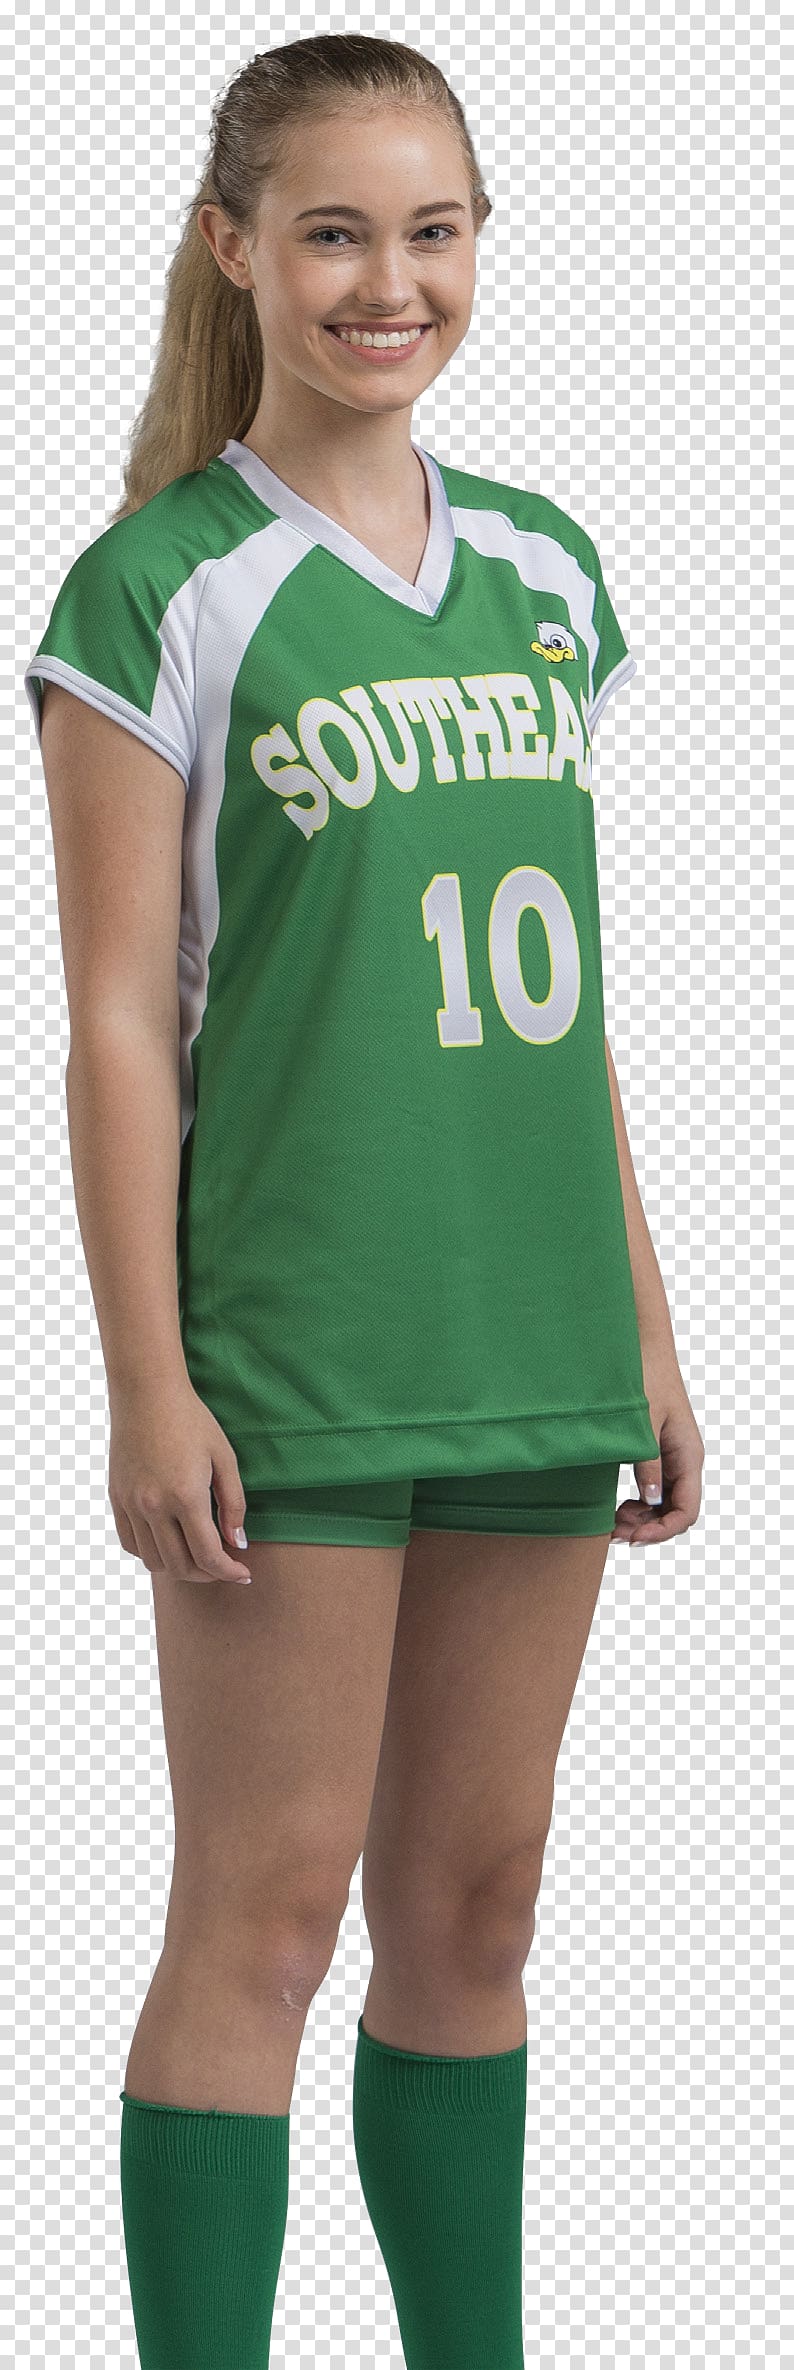 Cheerleading Uniforms T-shirt Jersey Sleeve Volleyball, T-shirt transparent background PNG clipart